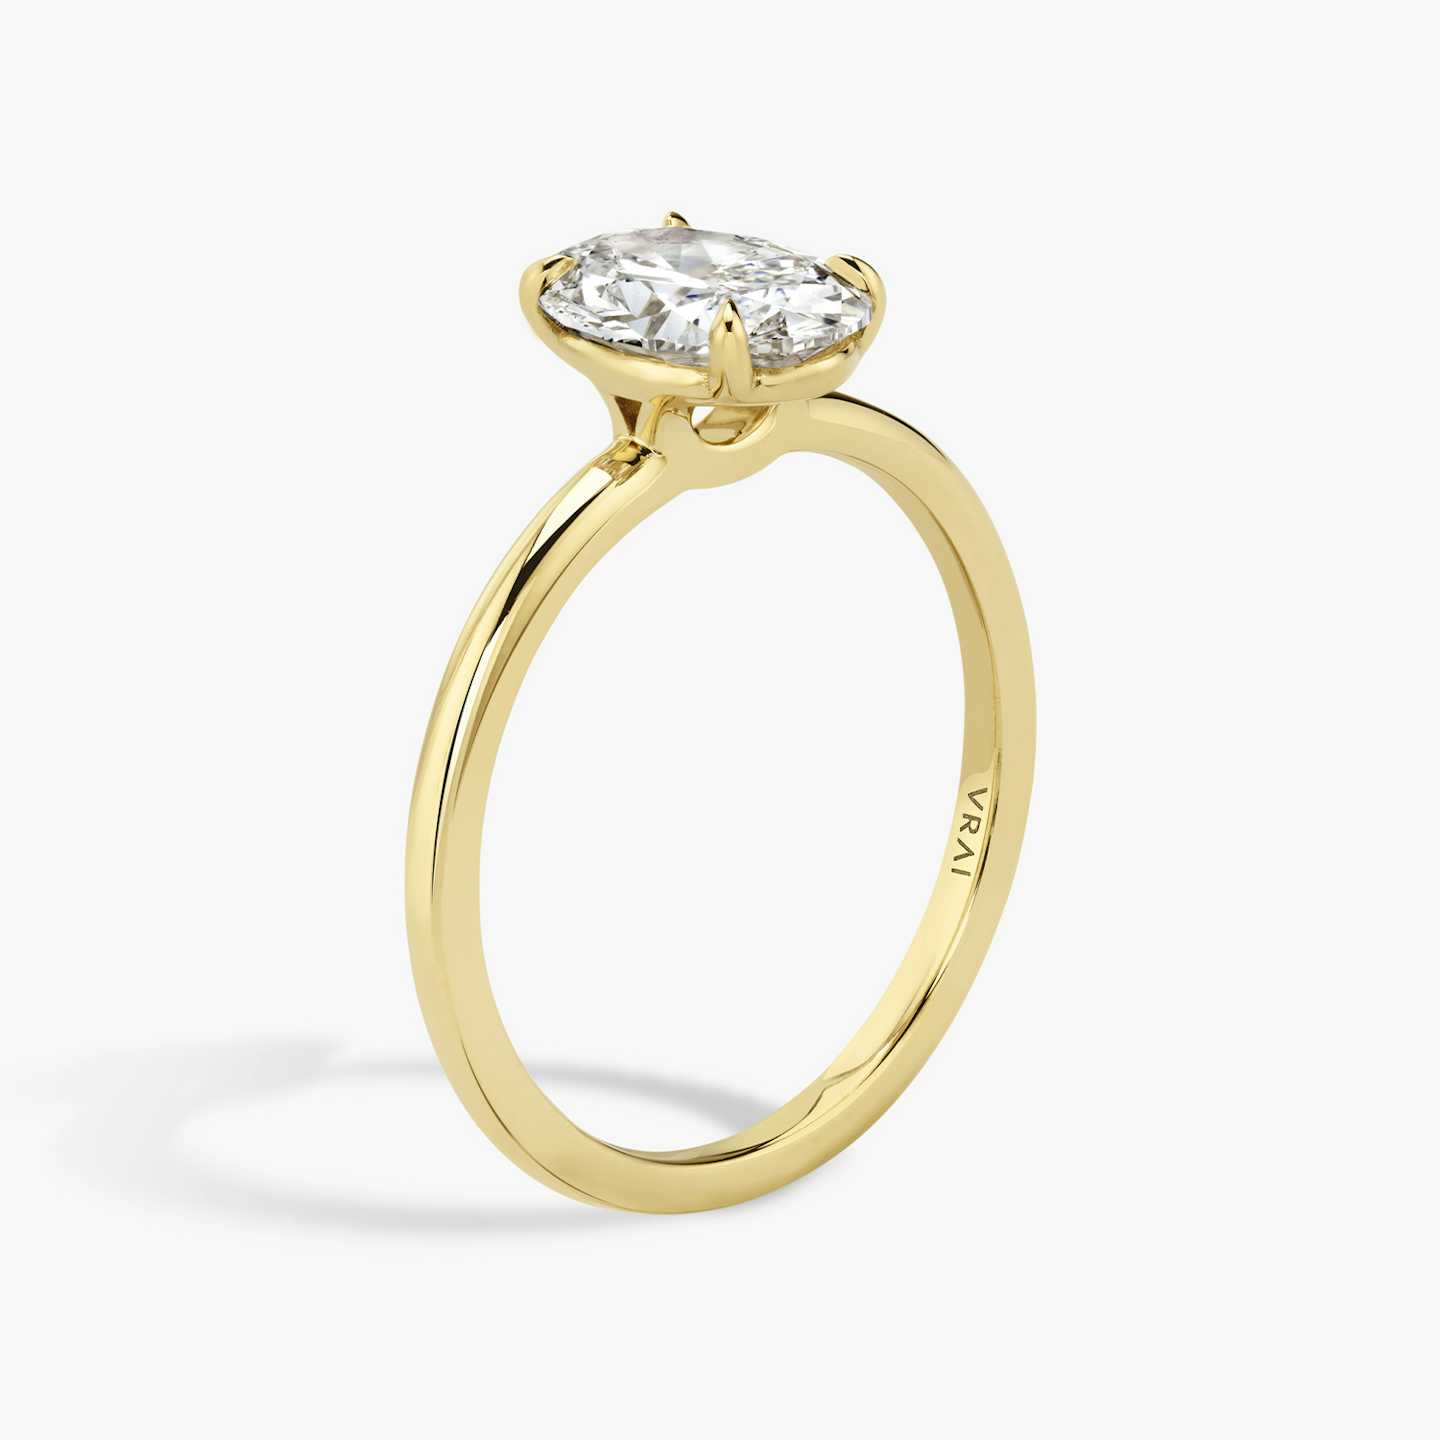 Signature prong oval engagement ring